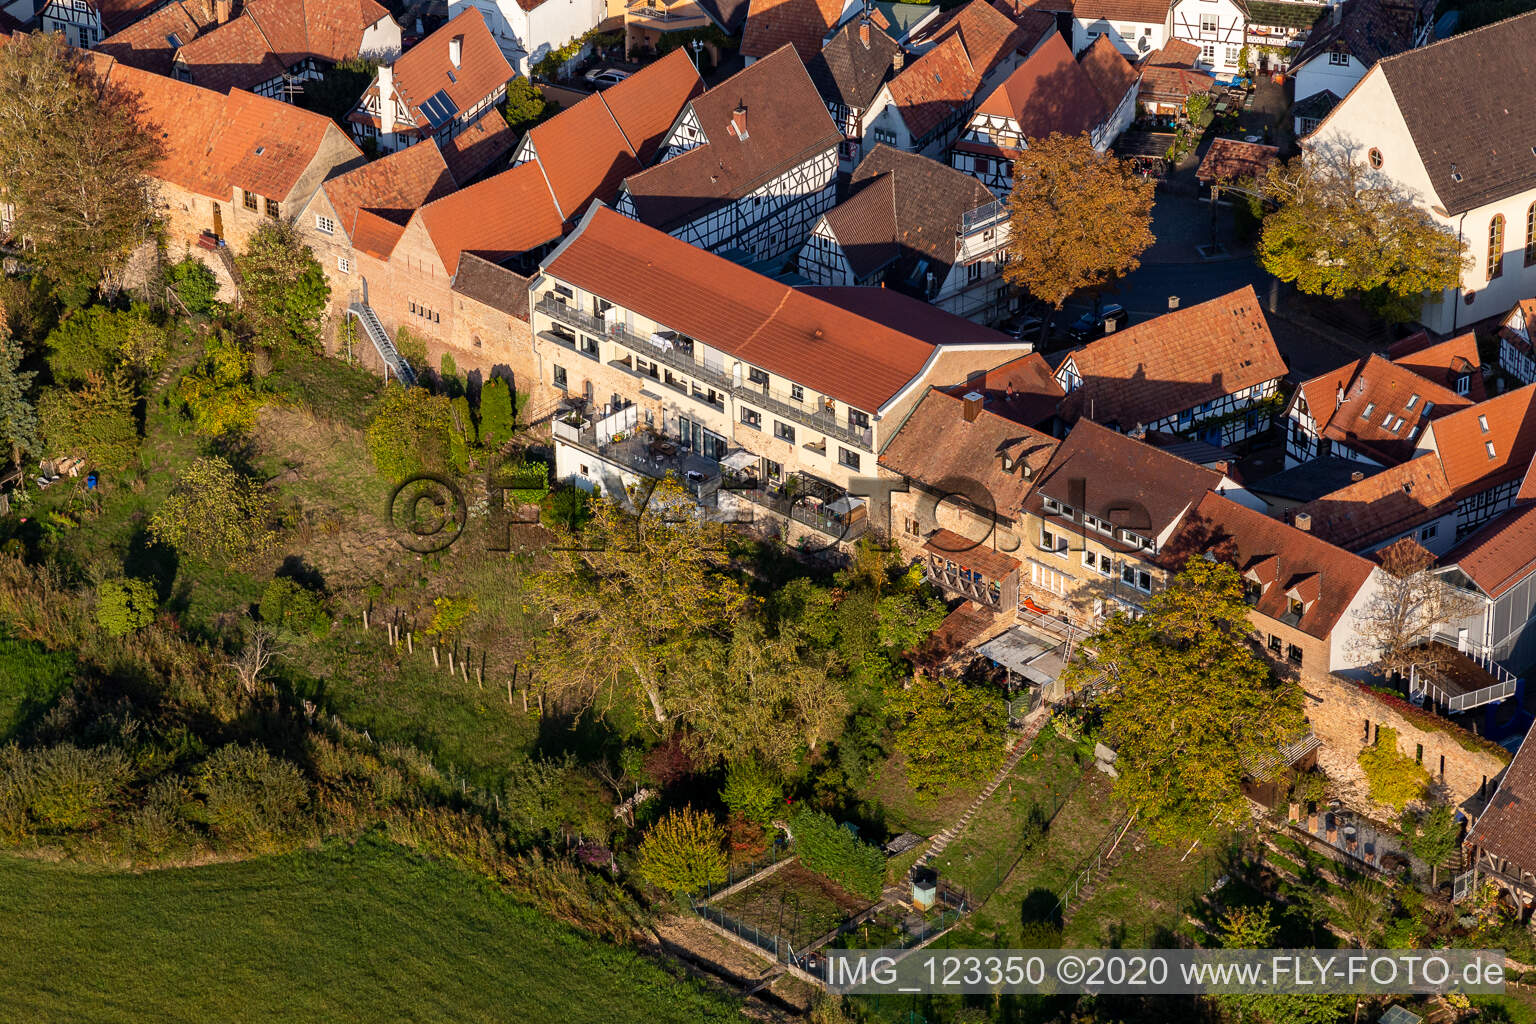 Aerial view of Living in the city wall on Ludwigstr in Jockgrim in the state Rhineland-Palatinate, Germany